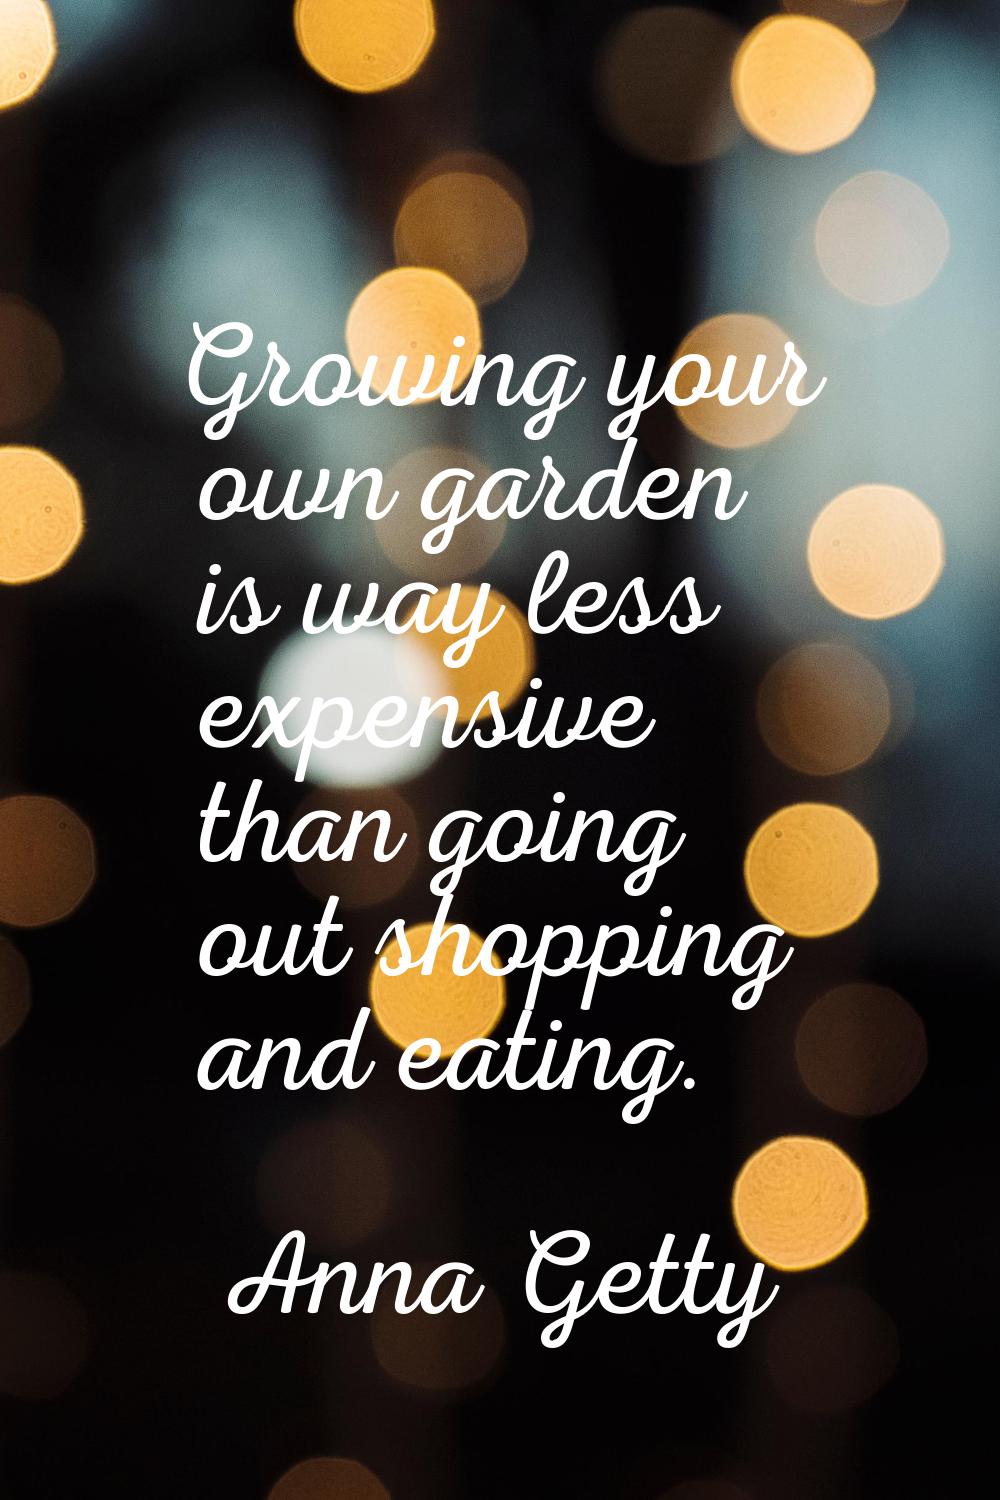 Growing your own garden is way less expensive than going out shopping and eating.